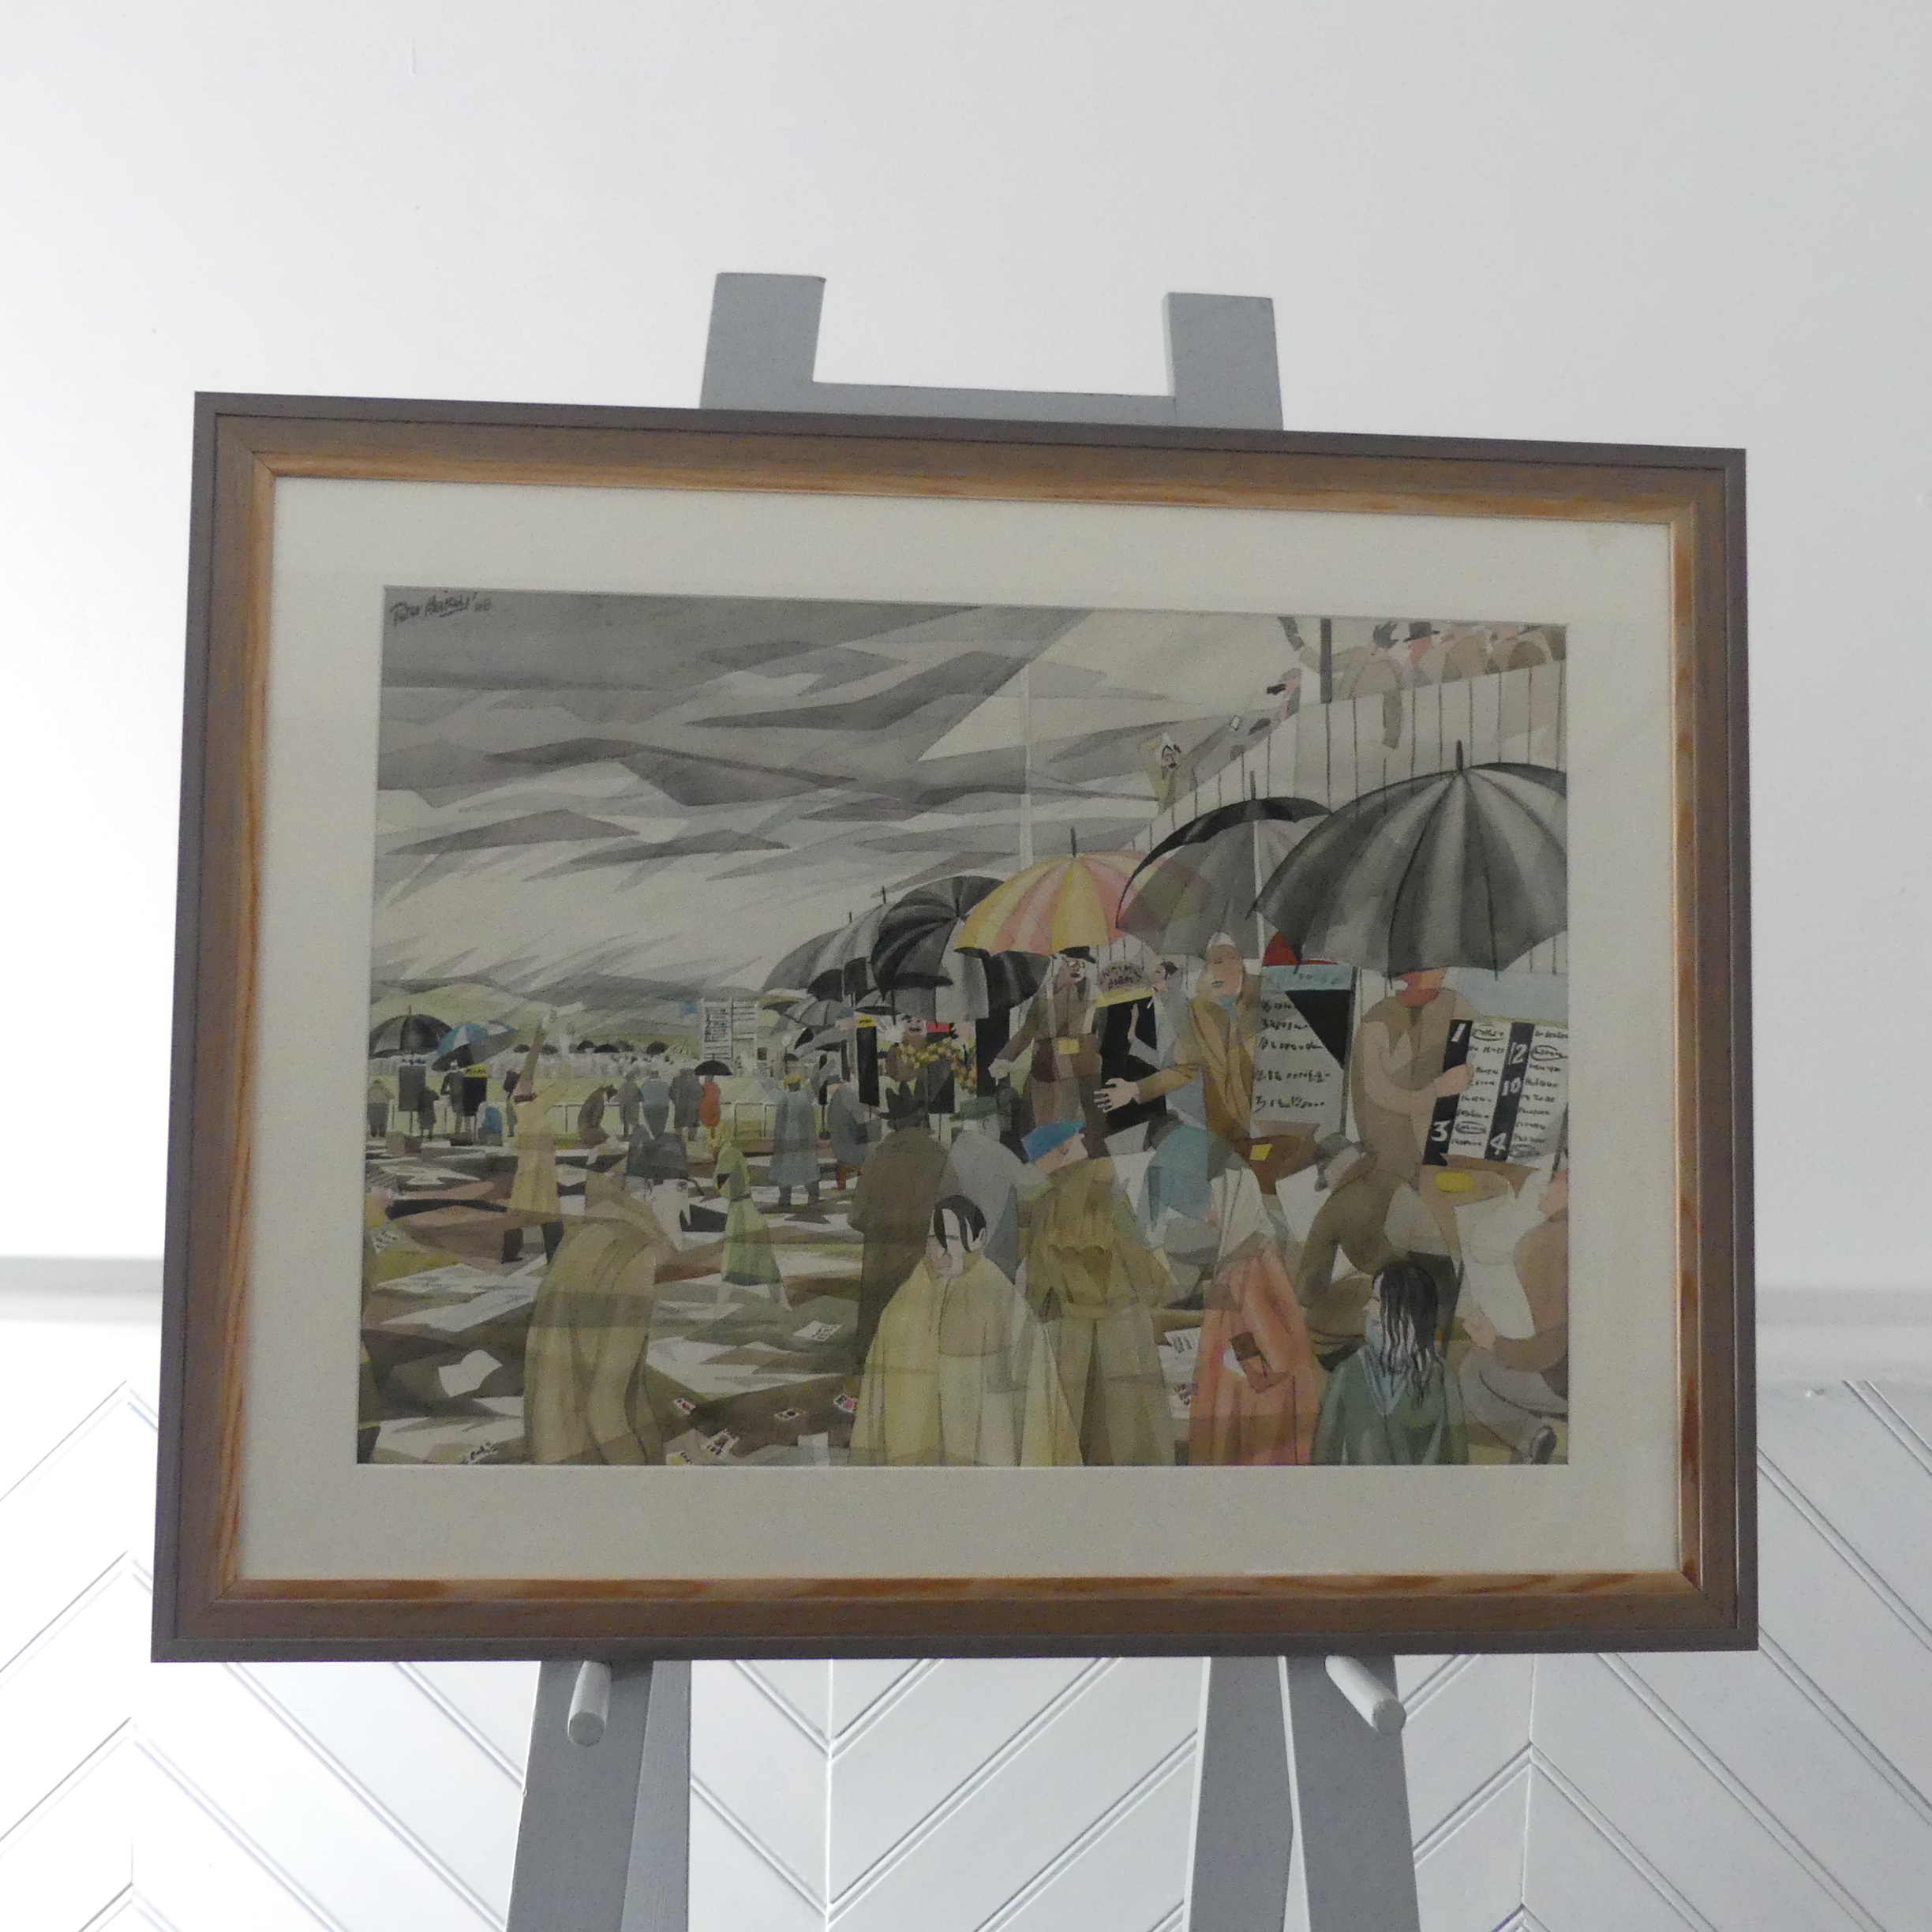 20th century school, A Day at the Races, pencil and watercolour, signed "Peter Maisey (?)" and dated